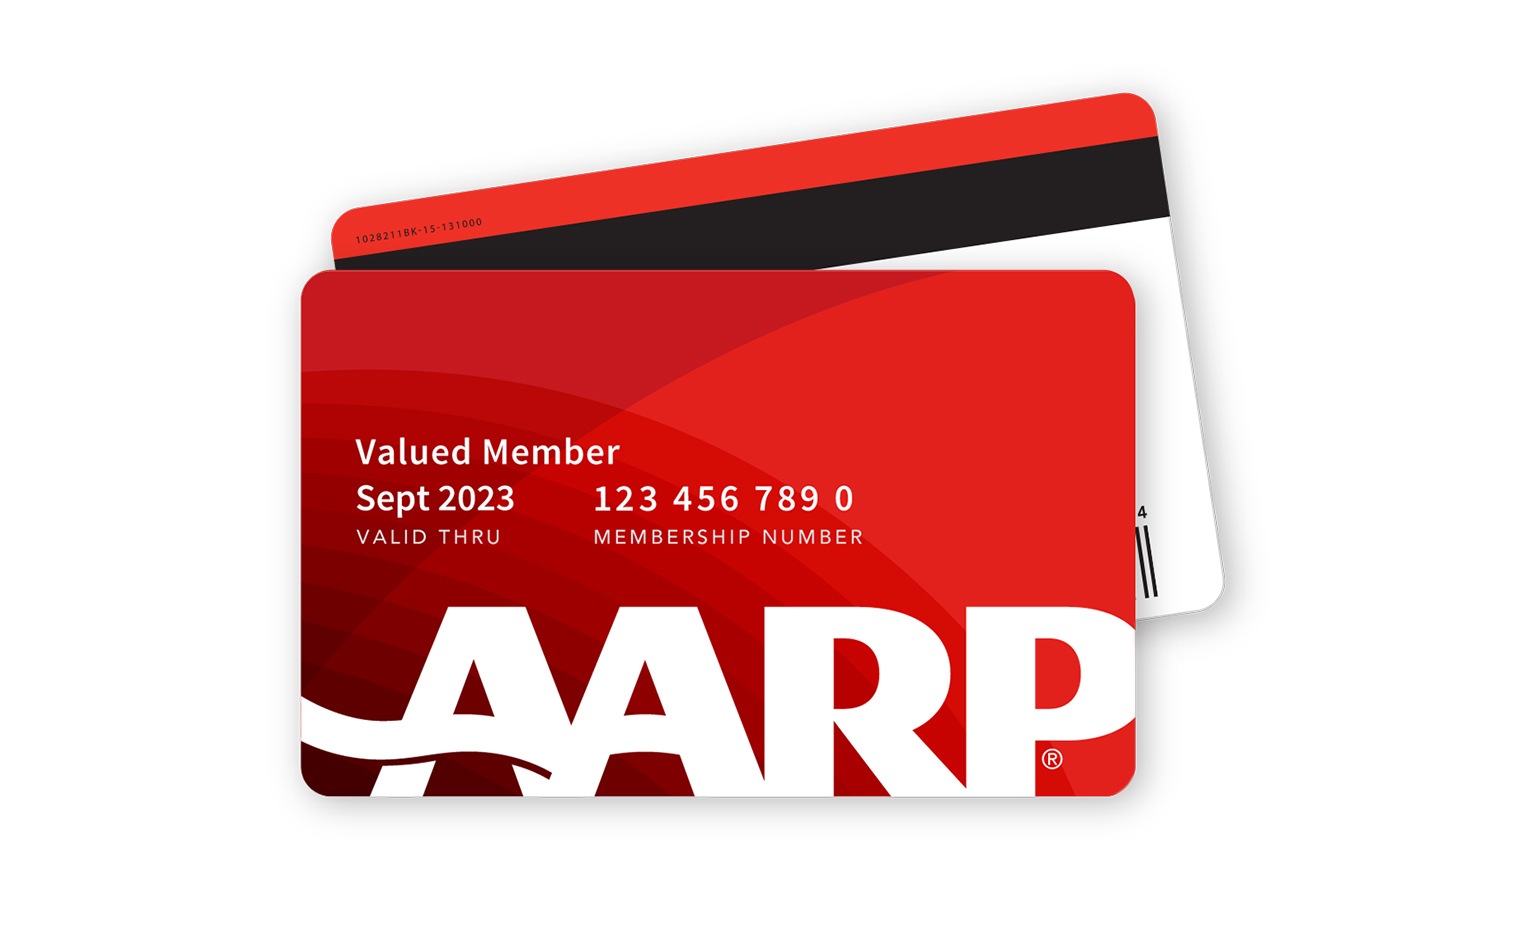 Cell Phone Plan Discounts For Aarp Members – 50+ And Seniors – At&T